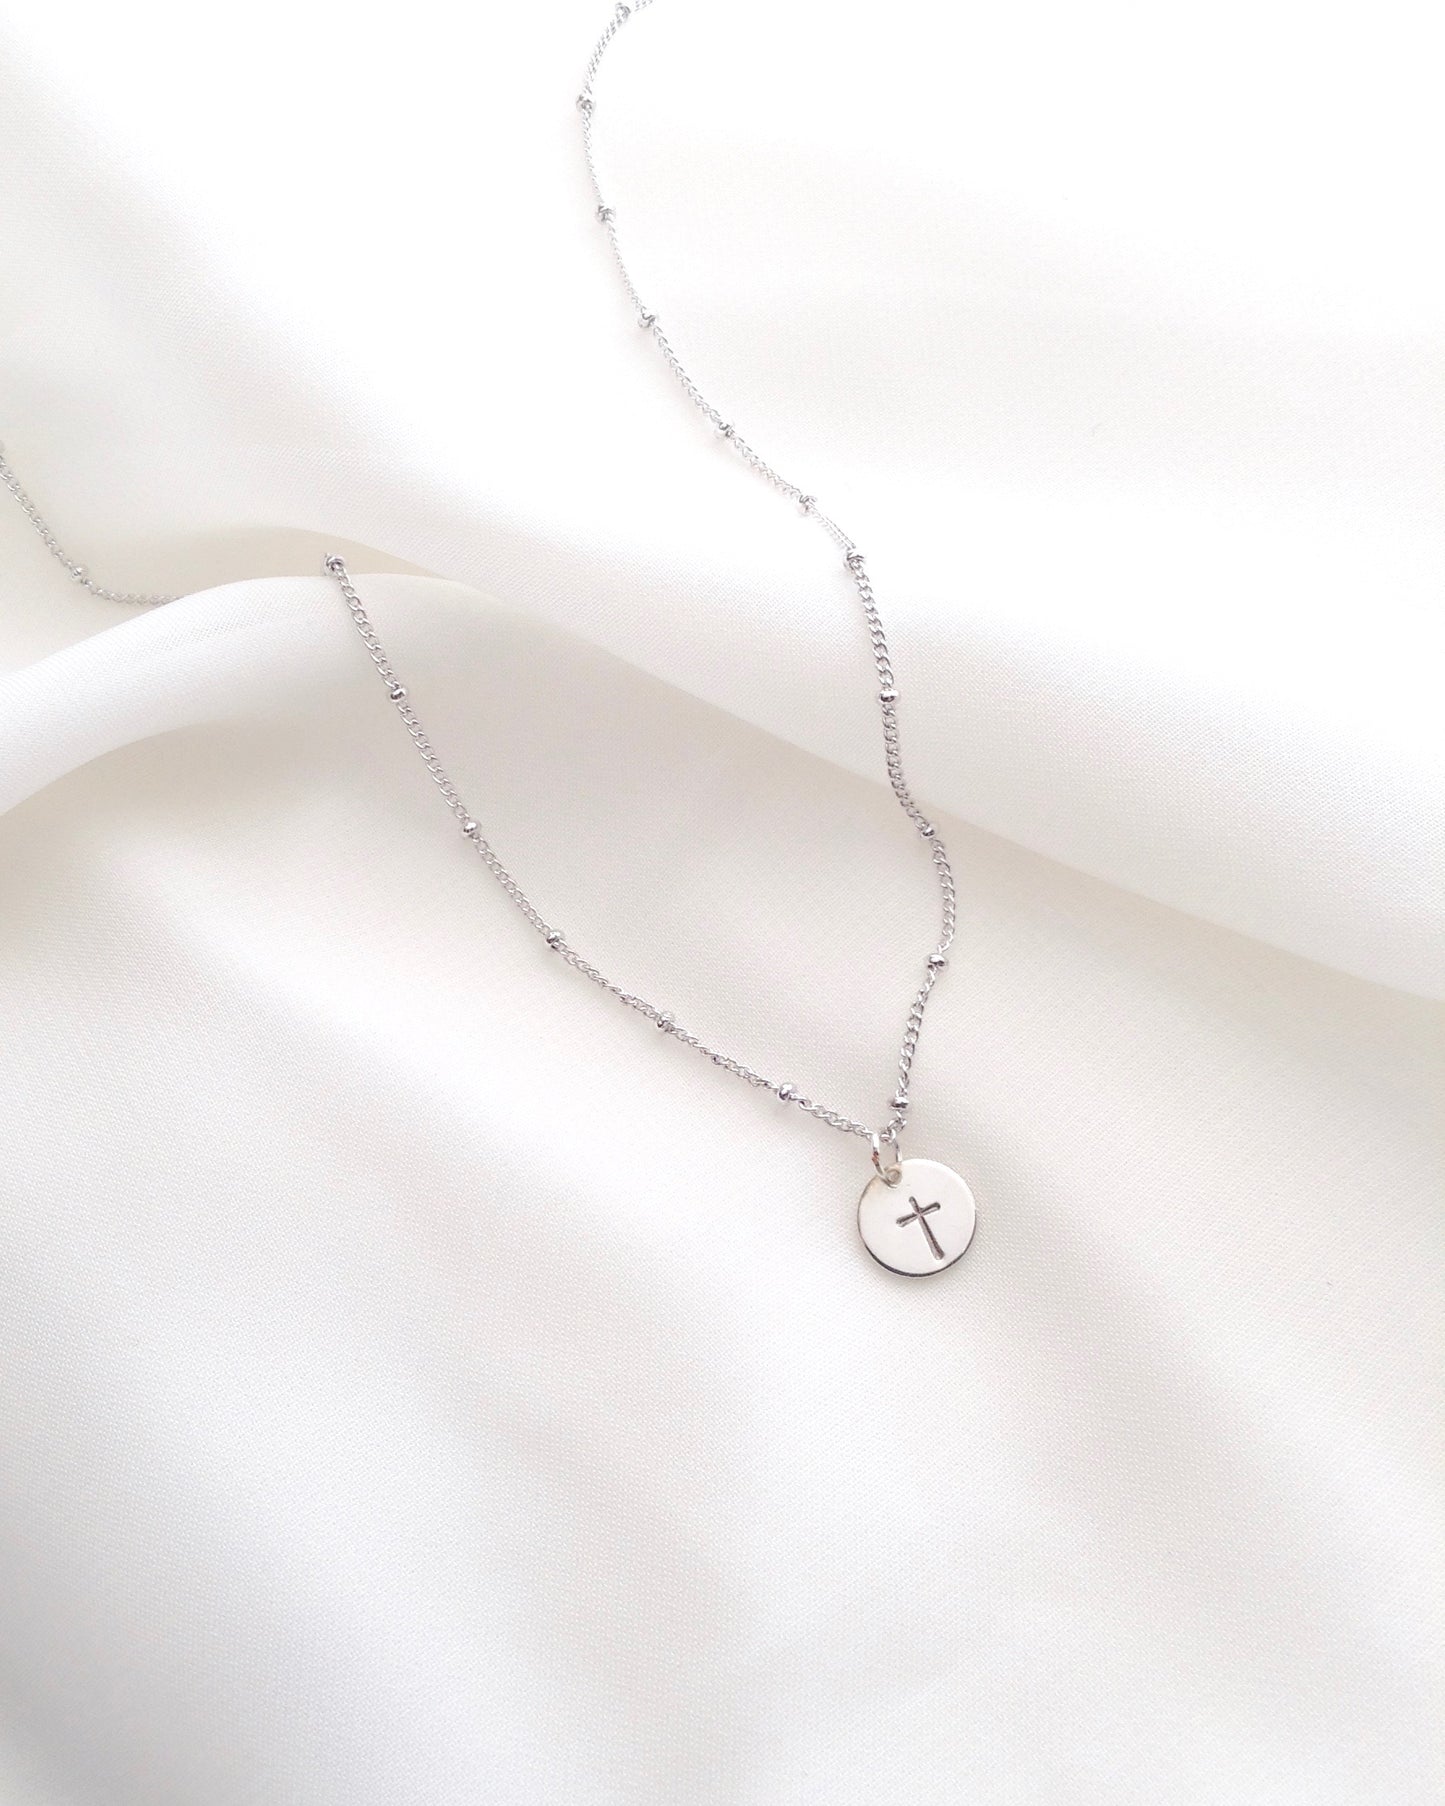 Minimalist Cross Dew Drop Necklace in Sterling Silver or Gold Filled | IB Jewelry